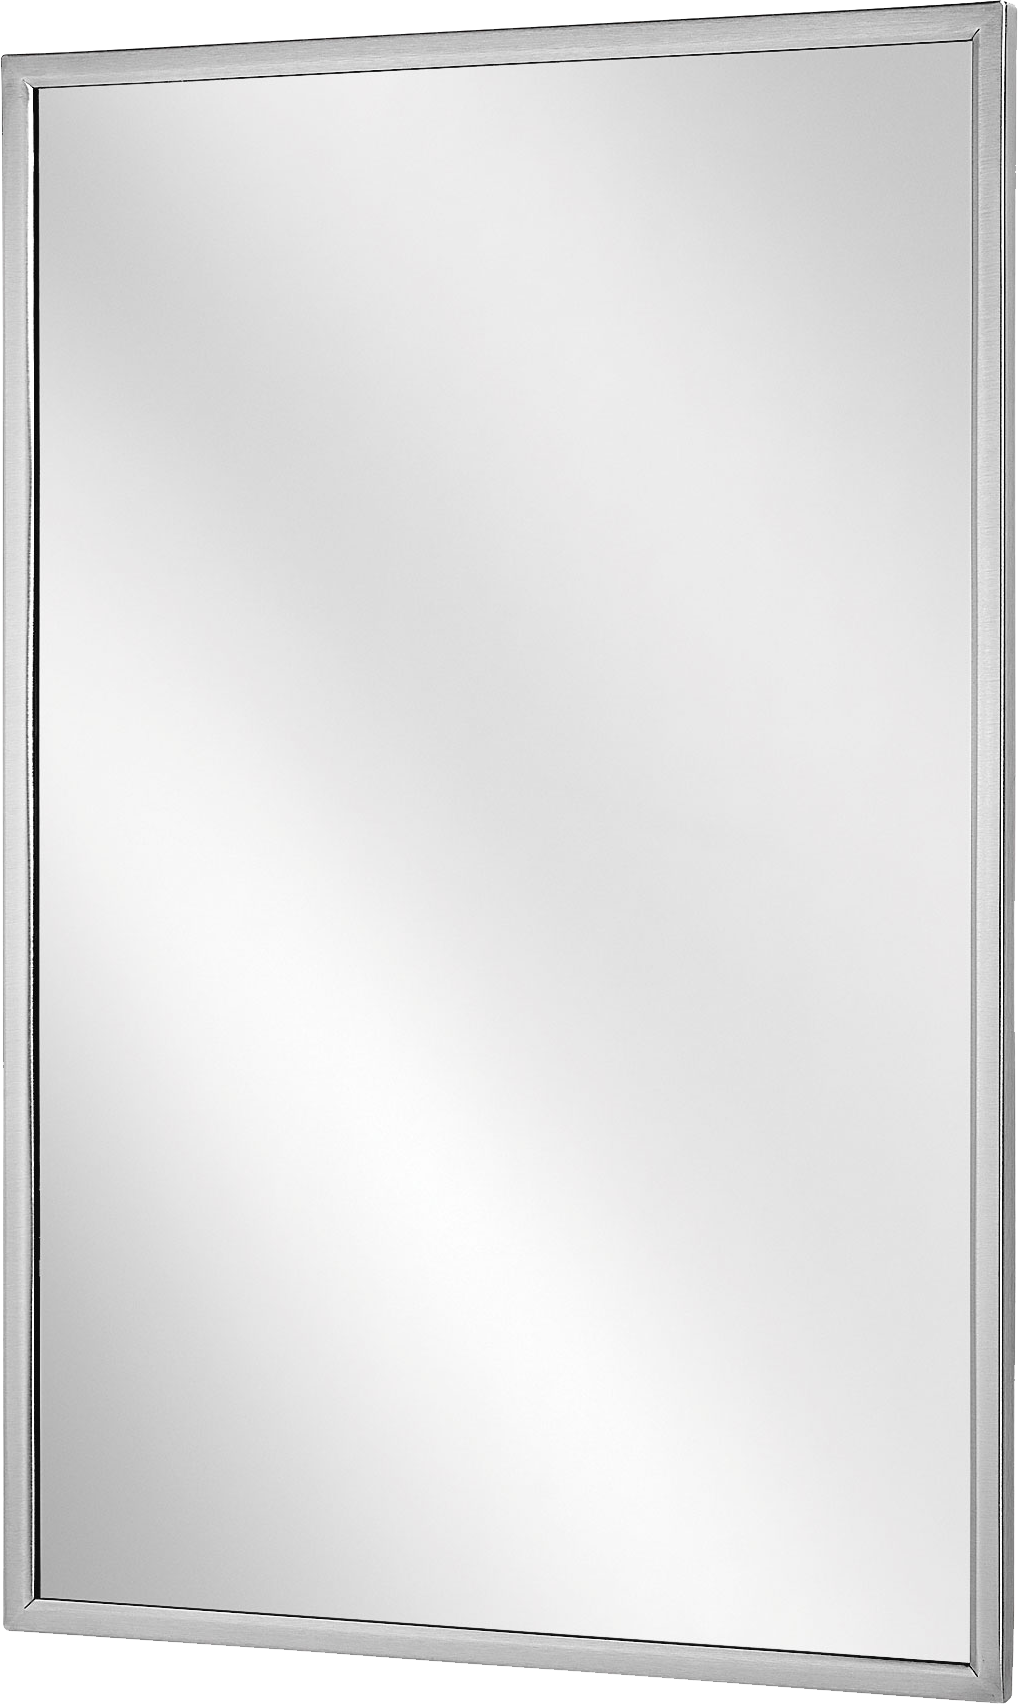 Picture Bathroom Angle Mirror Frames Rectangle PNG Image